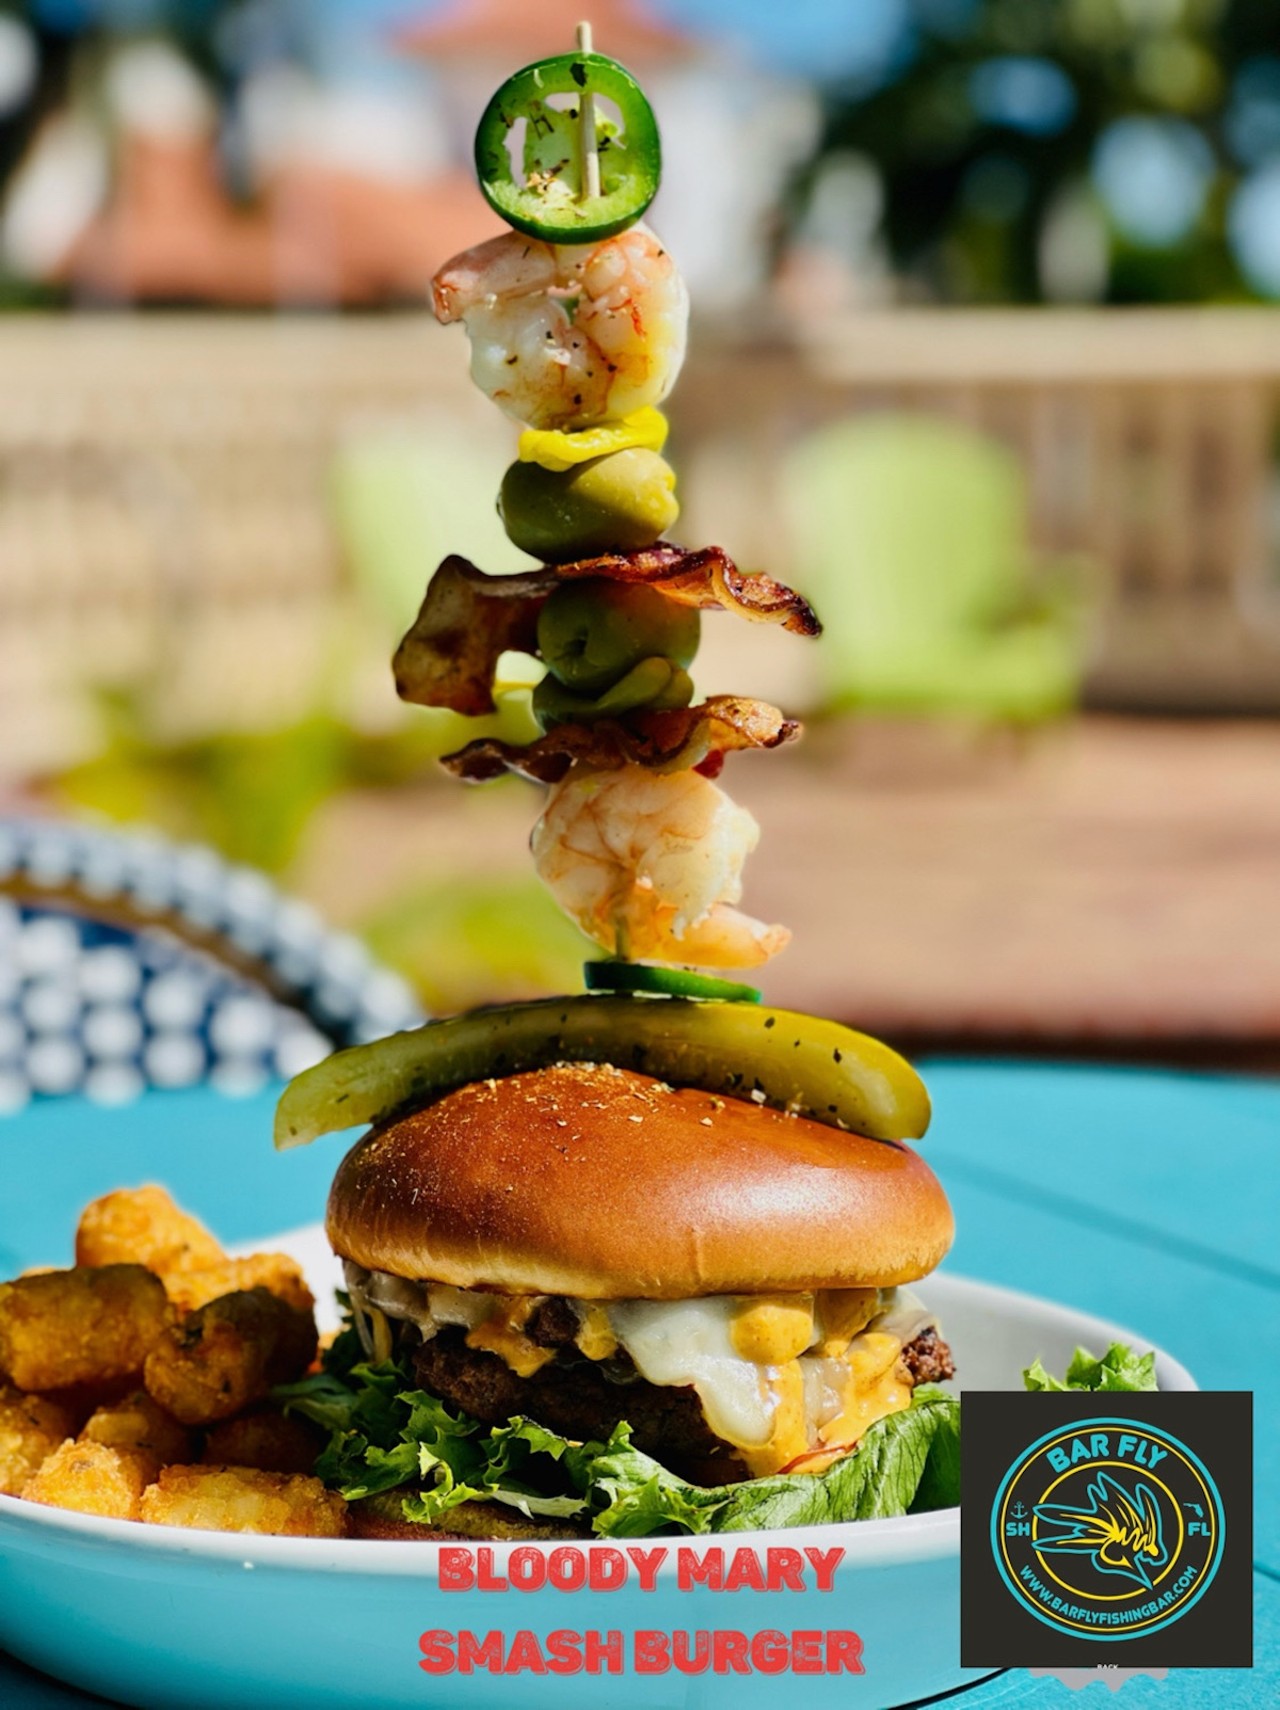 
Bar Fly Safety Harbor
100 Main St. #101, Safety Harbor
Bloody mary smash burger: (2) smash ground chuck patties mixed in bloody mary mix, swiss cheese, lettuce, tomato, horseradish aioli topped with a bloody mary skewer with shrimp & bacon! ($17)
Photo courtesy of Bar Fly Safety Harbor